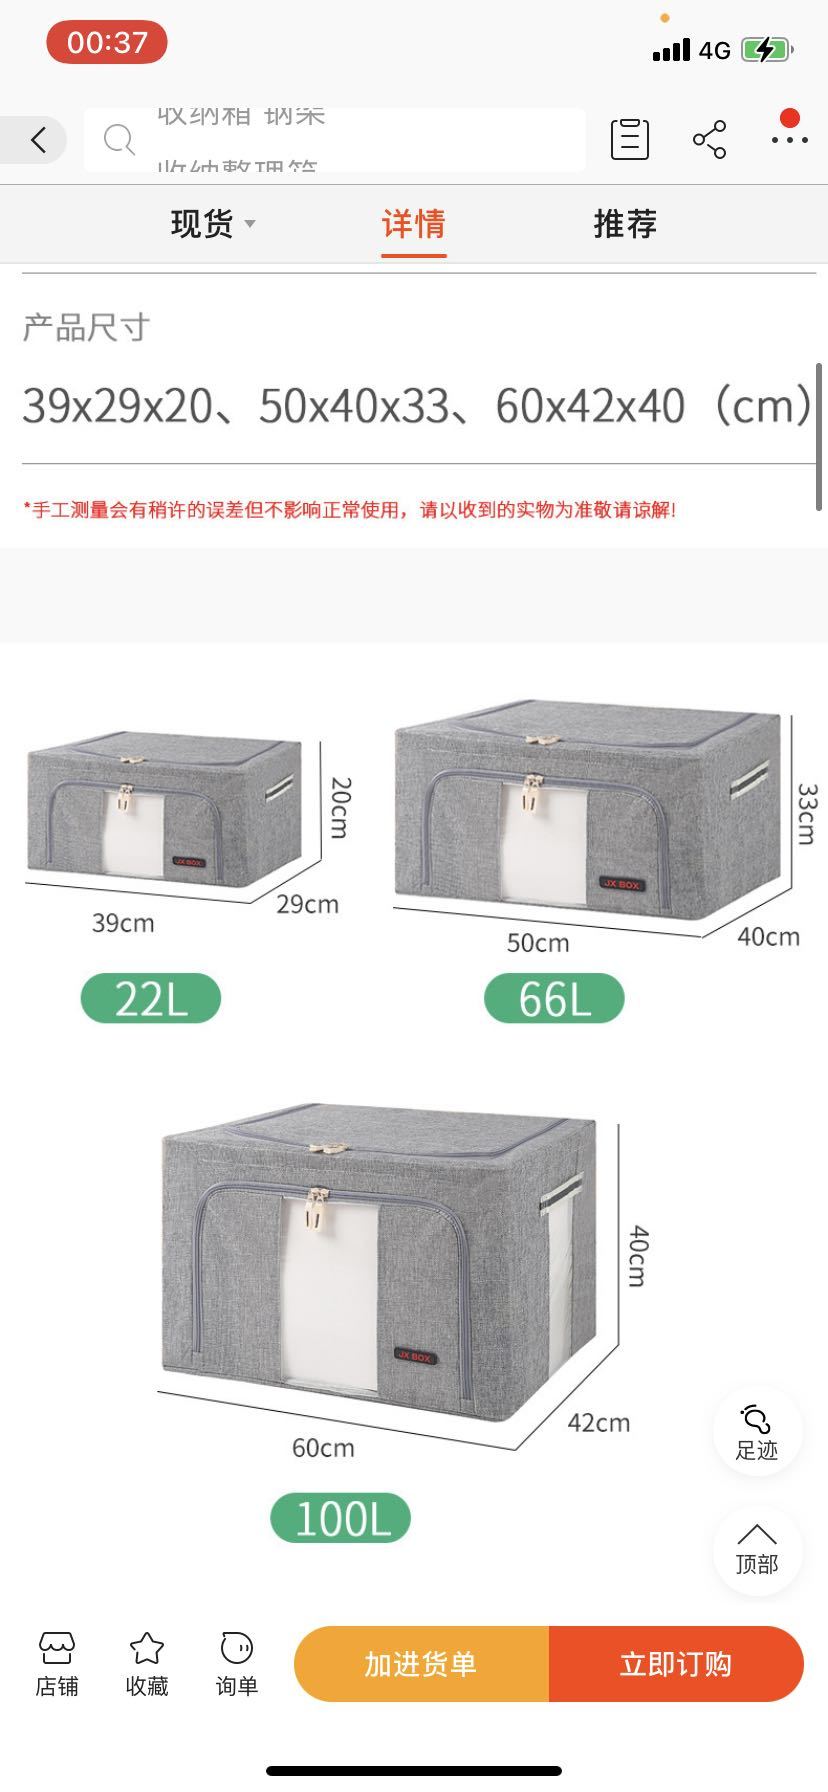 https://img1.superbuy.com/images/consult/2021/04/13/5b4a3ea04aa81d89be424a77677143bb.jpg?x-oss-process=image/resize,w_950